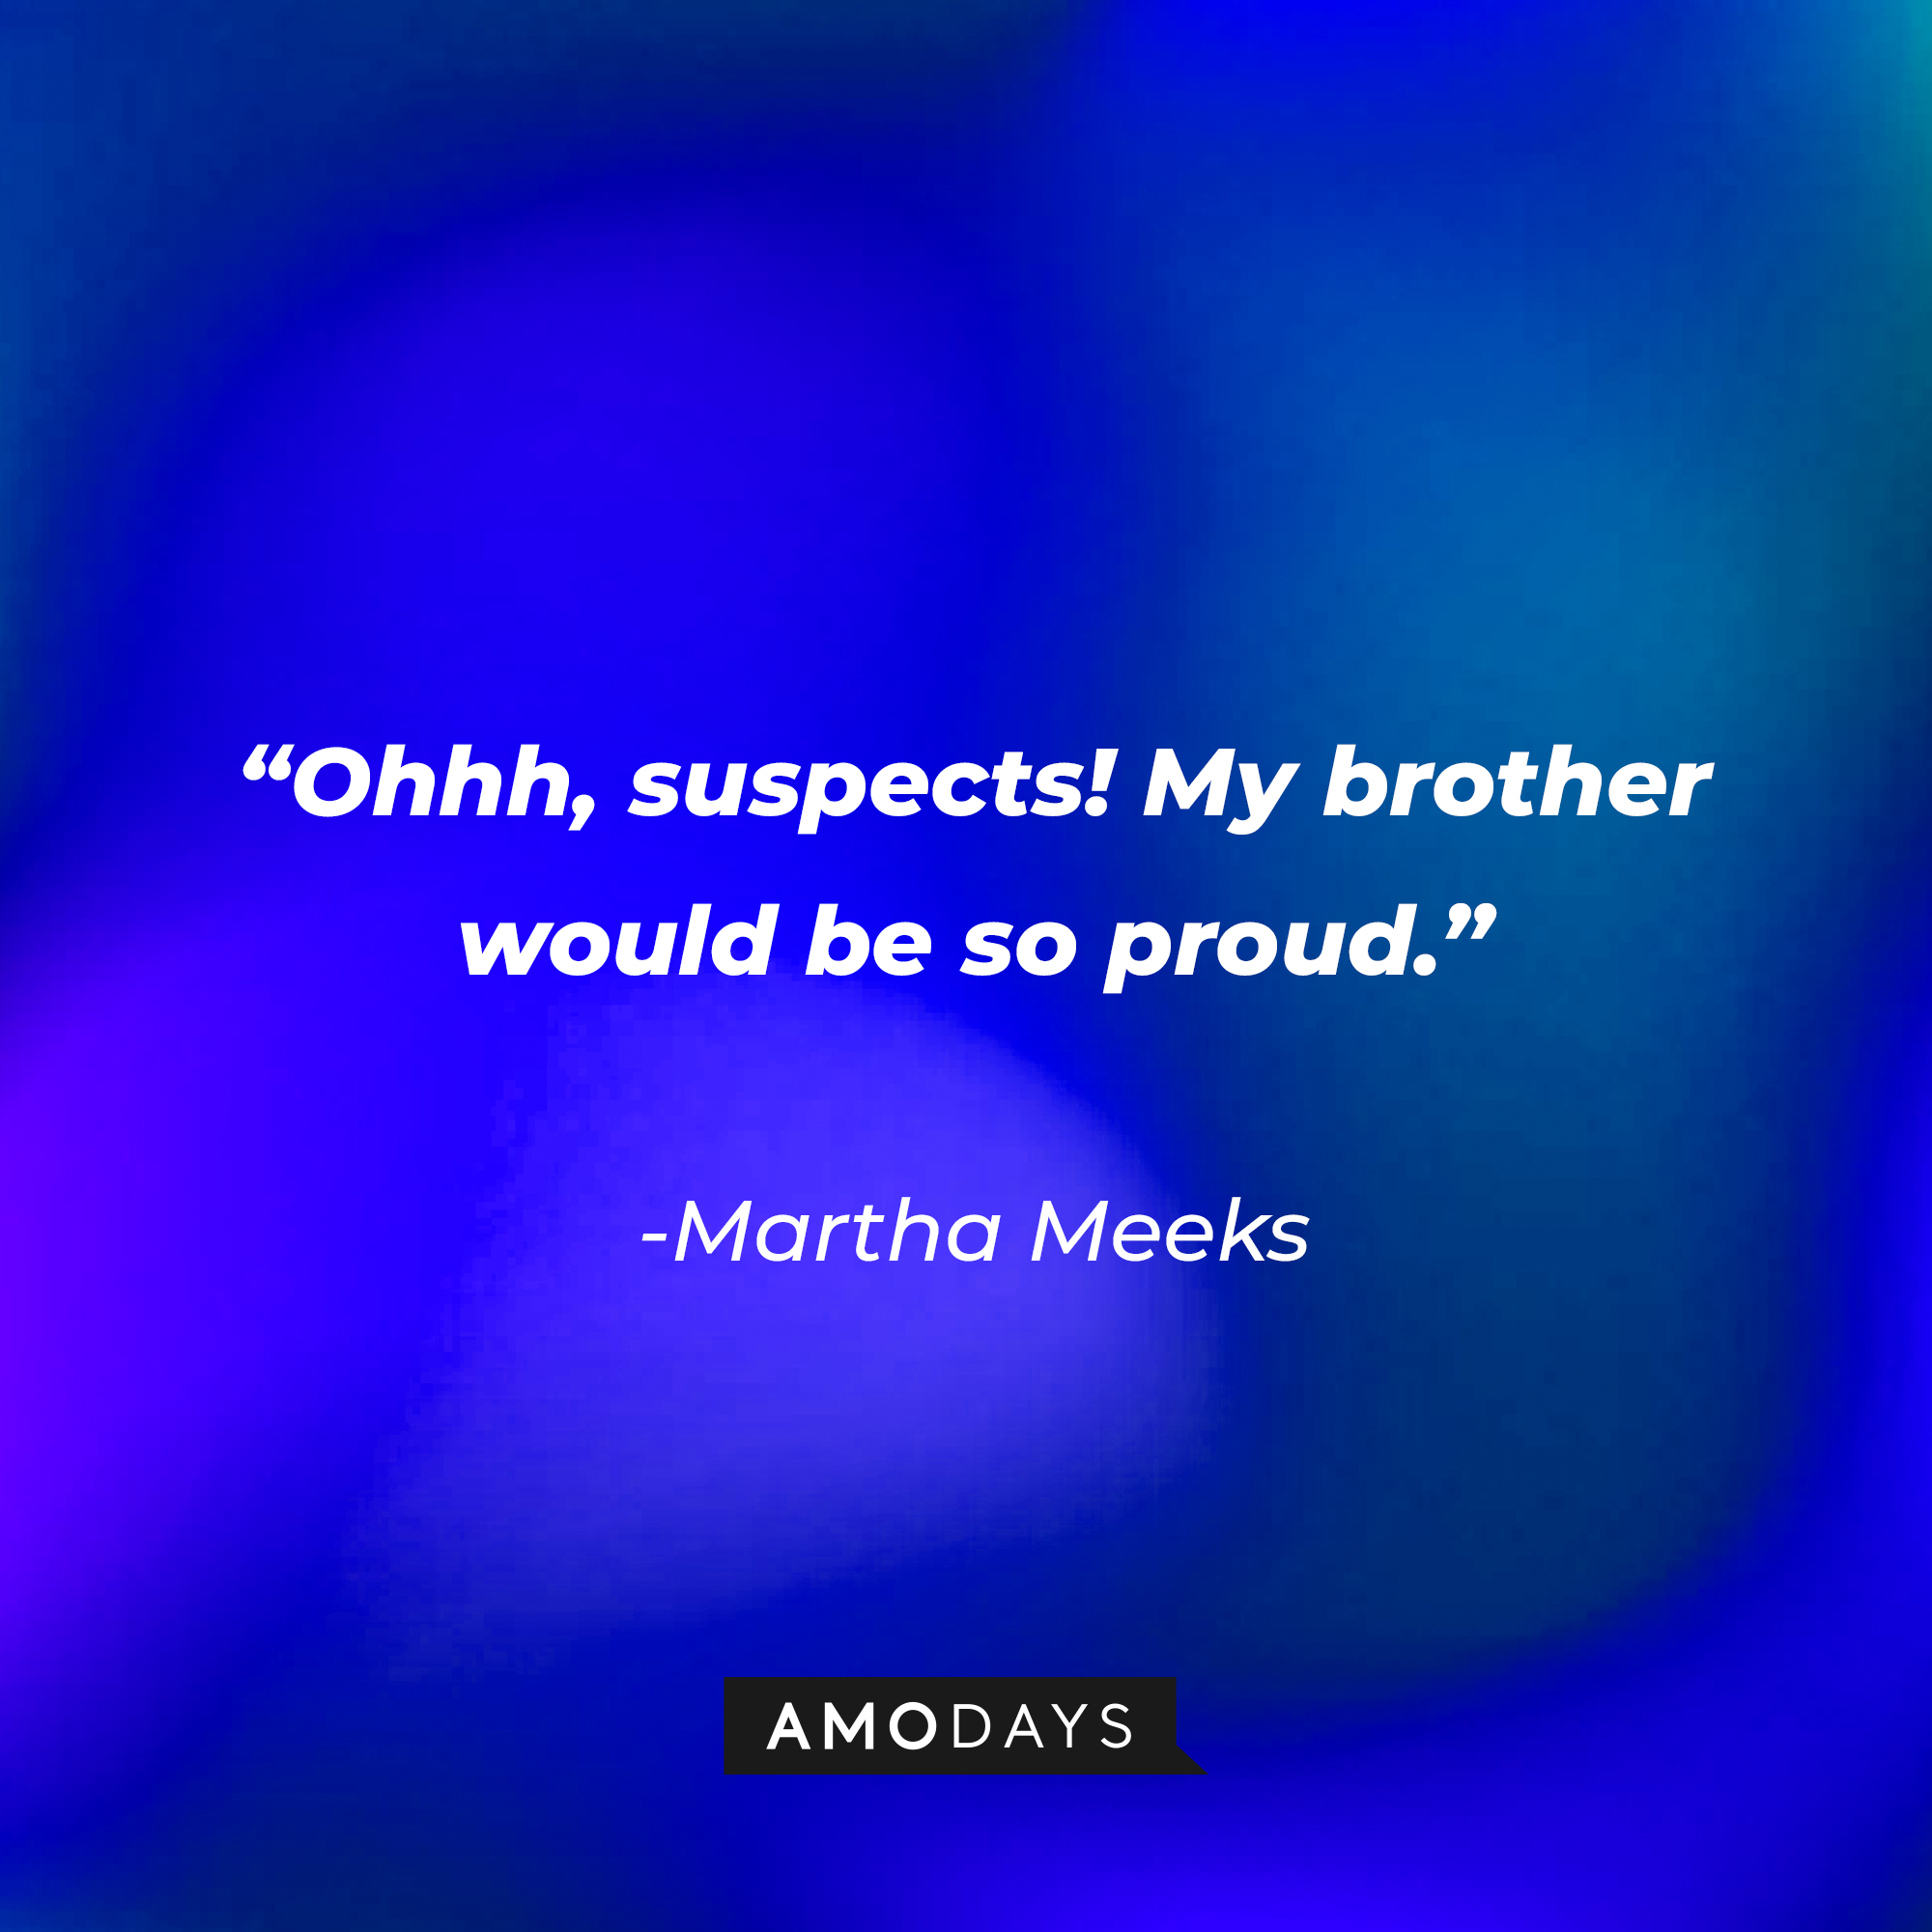 Martha Meek’s quote from “Scream ‘(2020)’”: "Ohhh suspects! My brother would be so proud." | Source: AmoDays